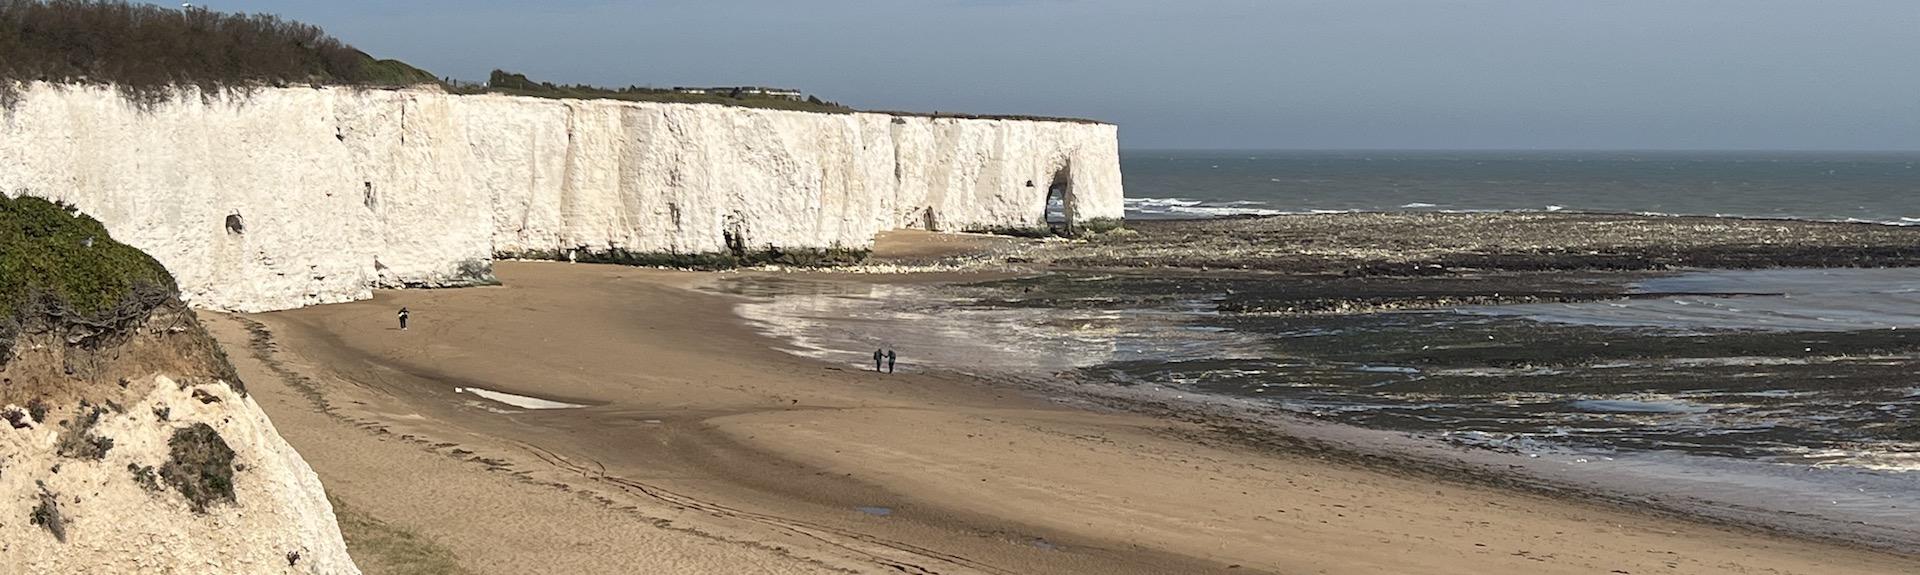 white cliffs at Broadstairs tower above a sandy beach at low tide on a clear summer's day.